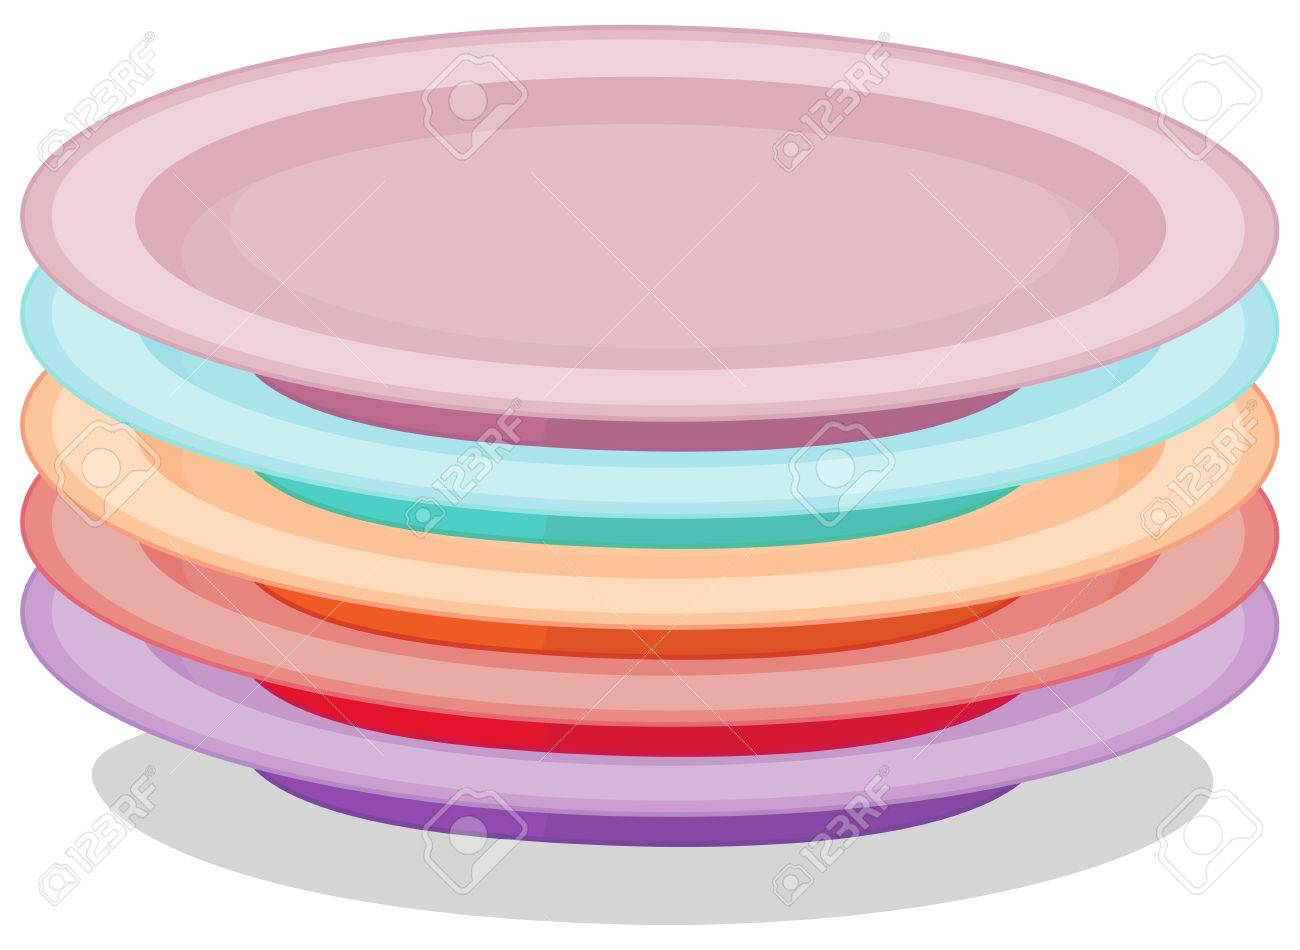 Illustration of a stack of plates Stock Vector - 30600886